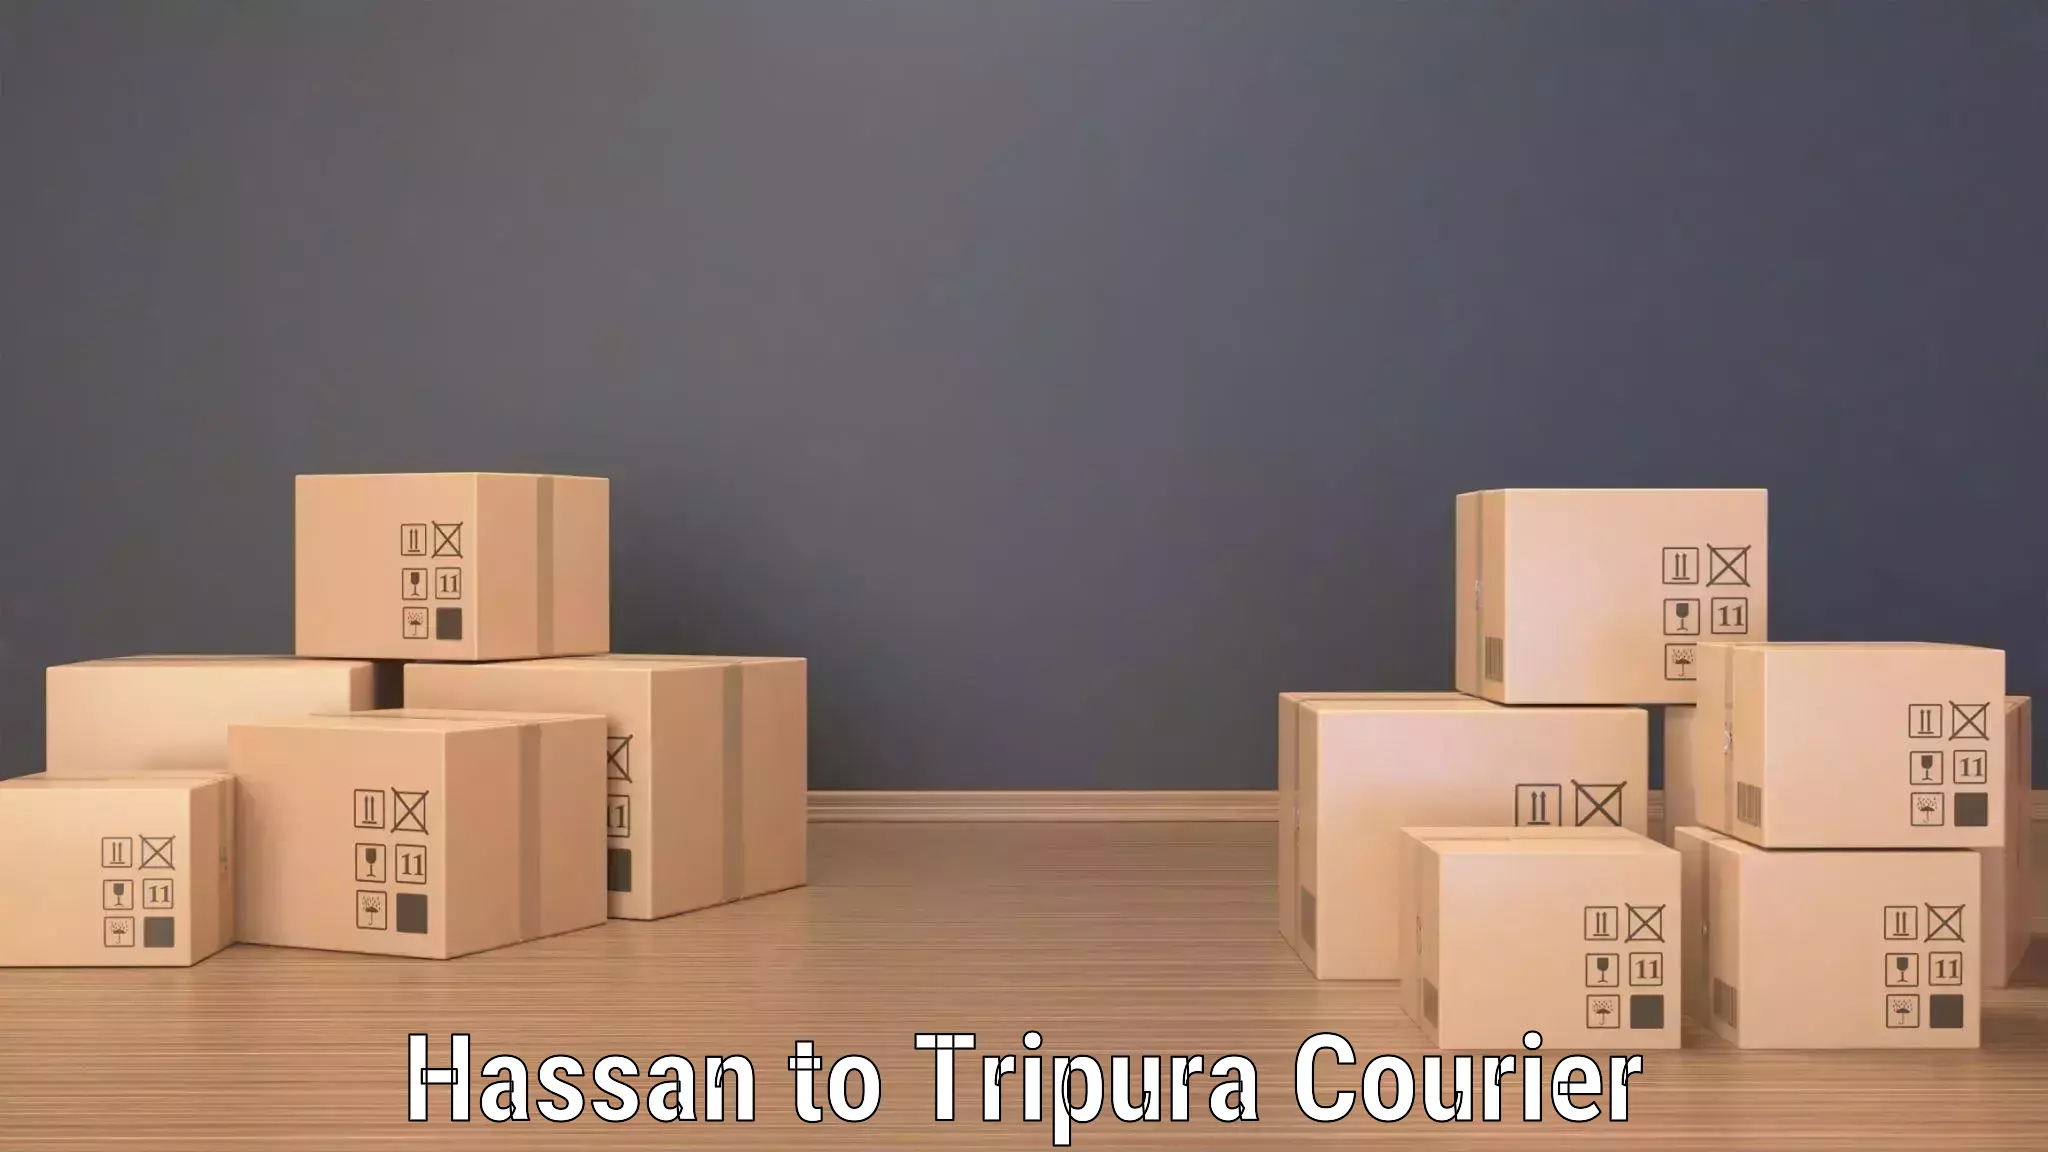 Professional courier handling Hassan to Tripura